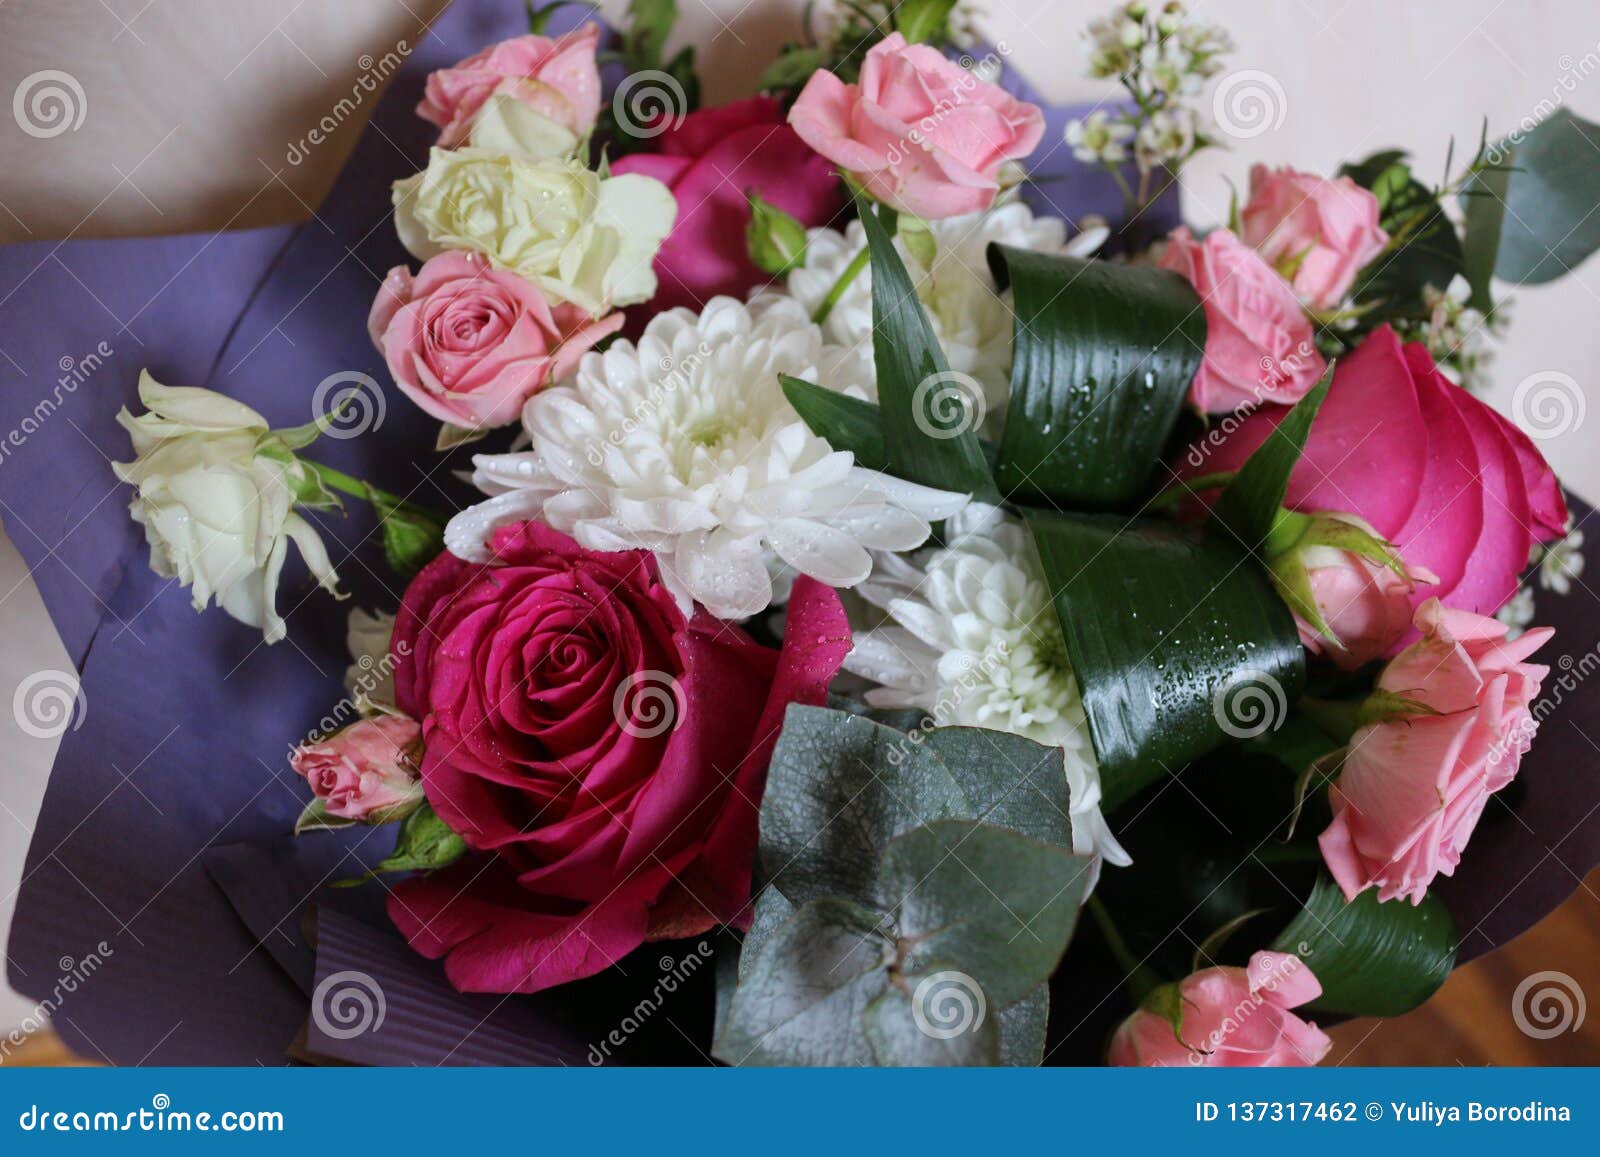 A Beautiful Bouquet of Roses and Other Flowers is a Welcome Gift for ...